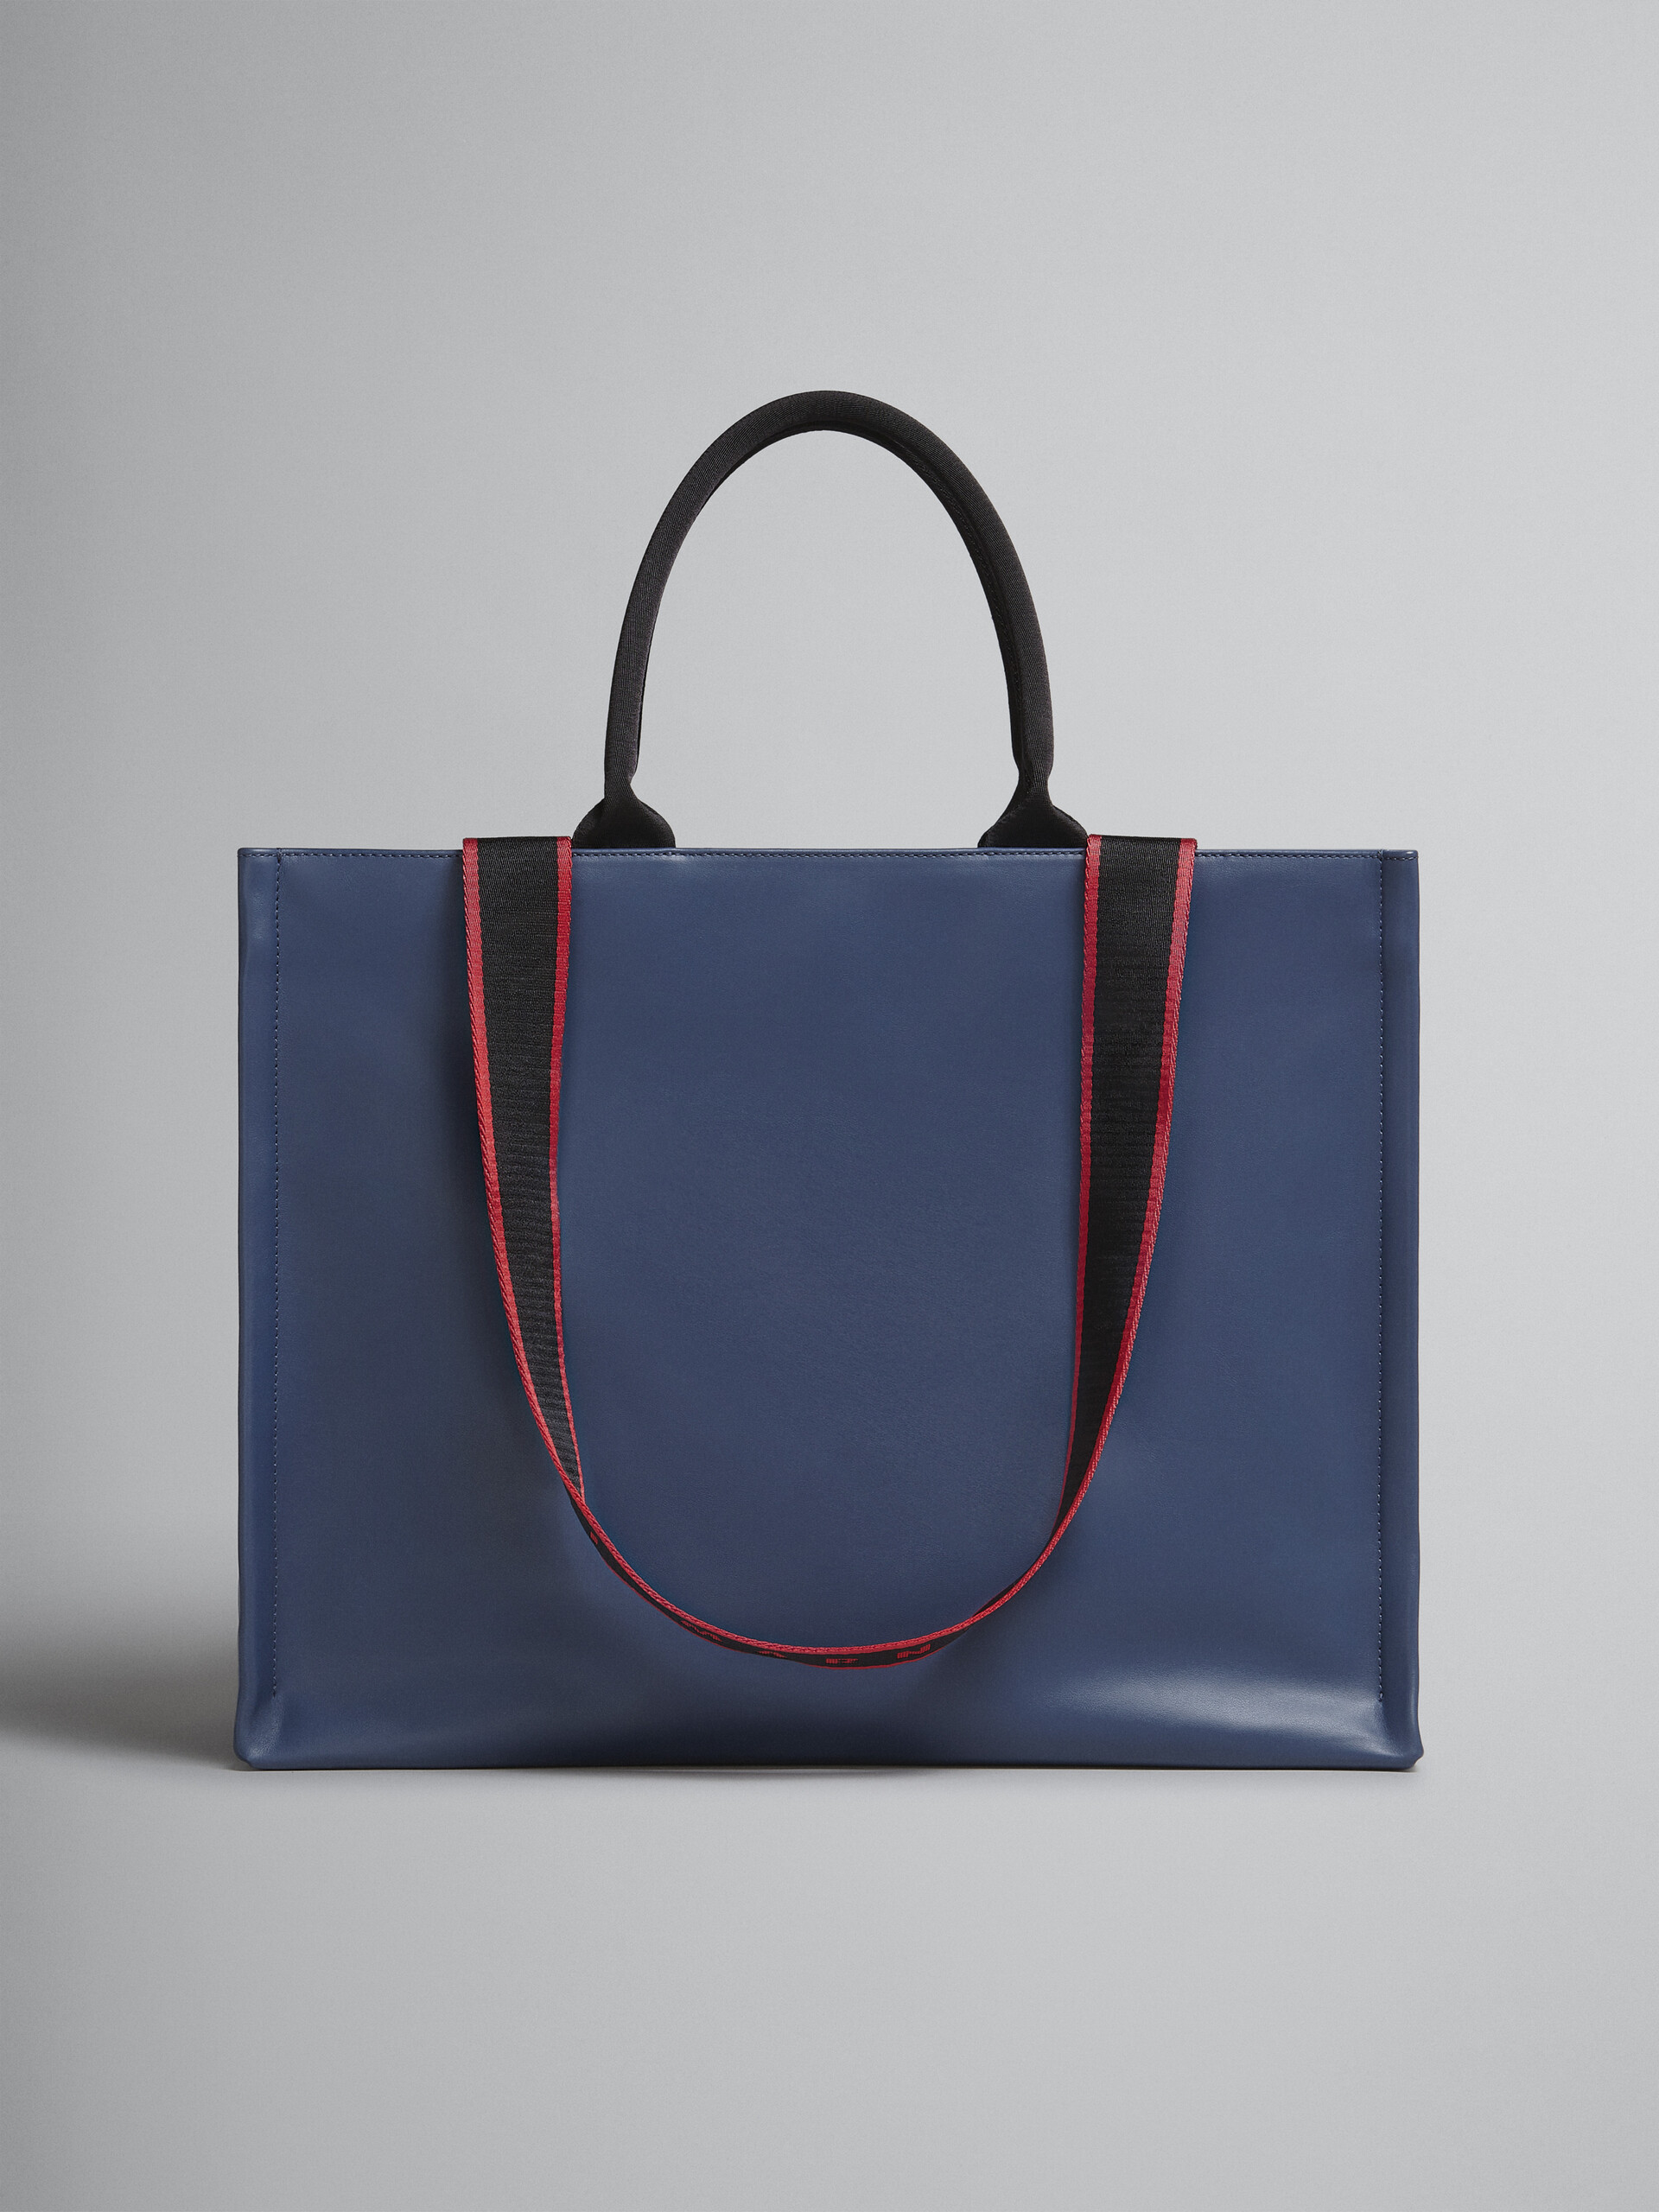 Bey Tote Bag in blue leather - Shopping Bags - Image 1